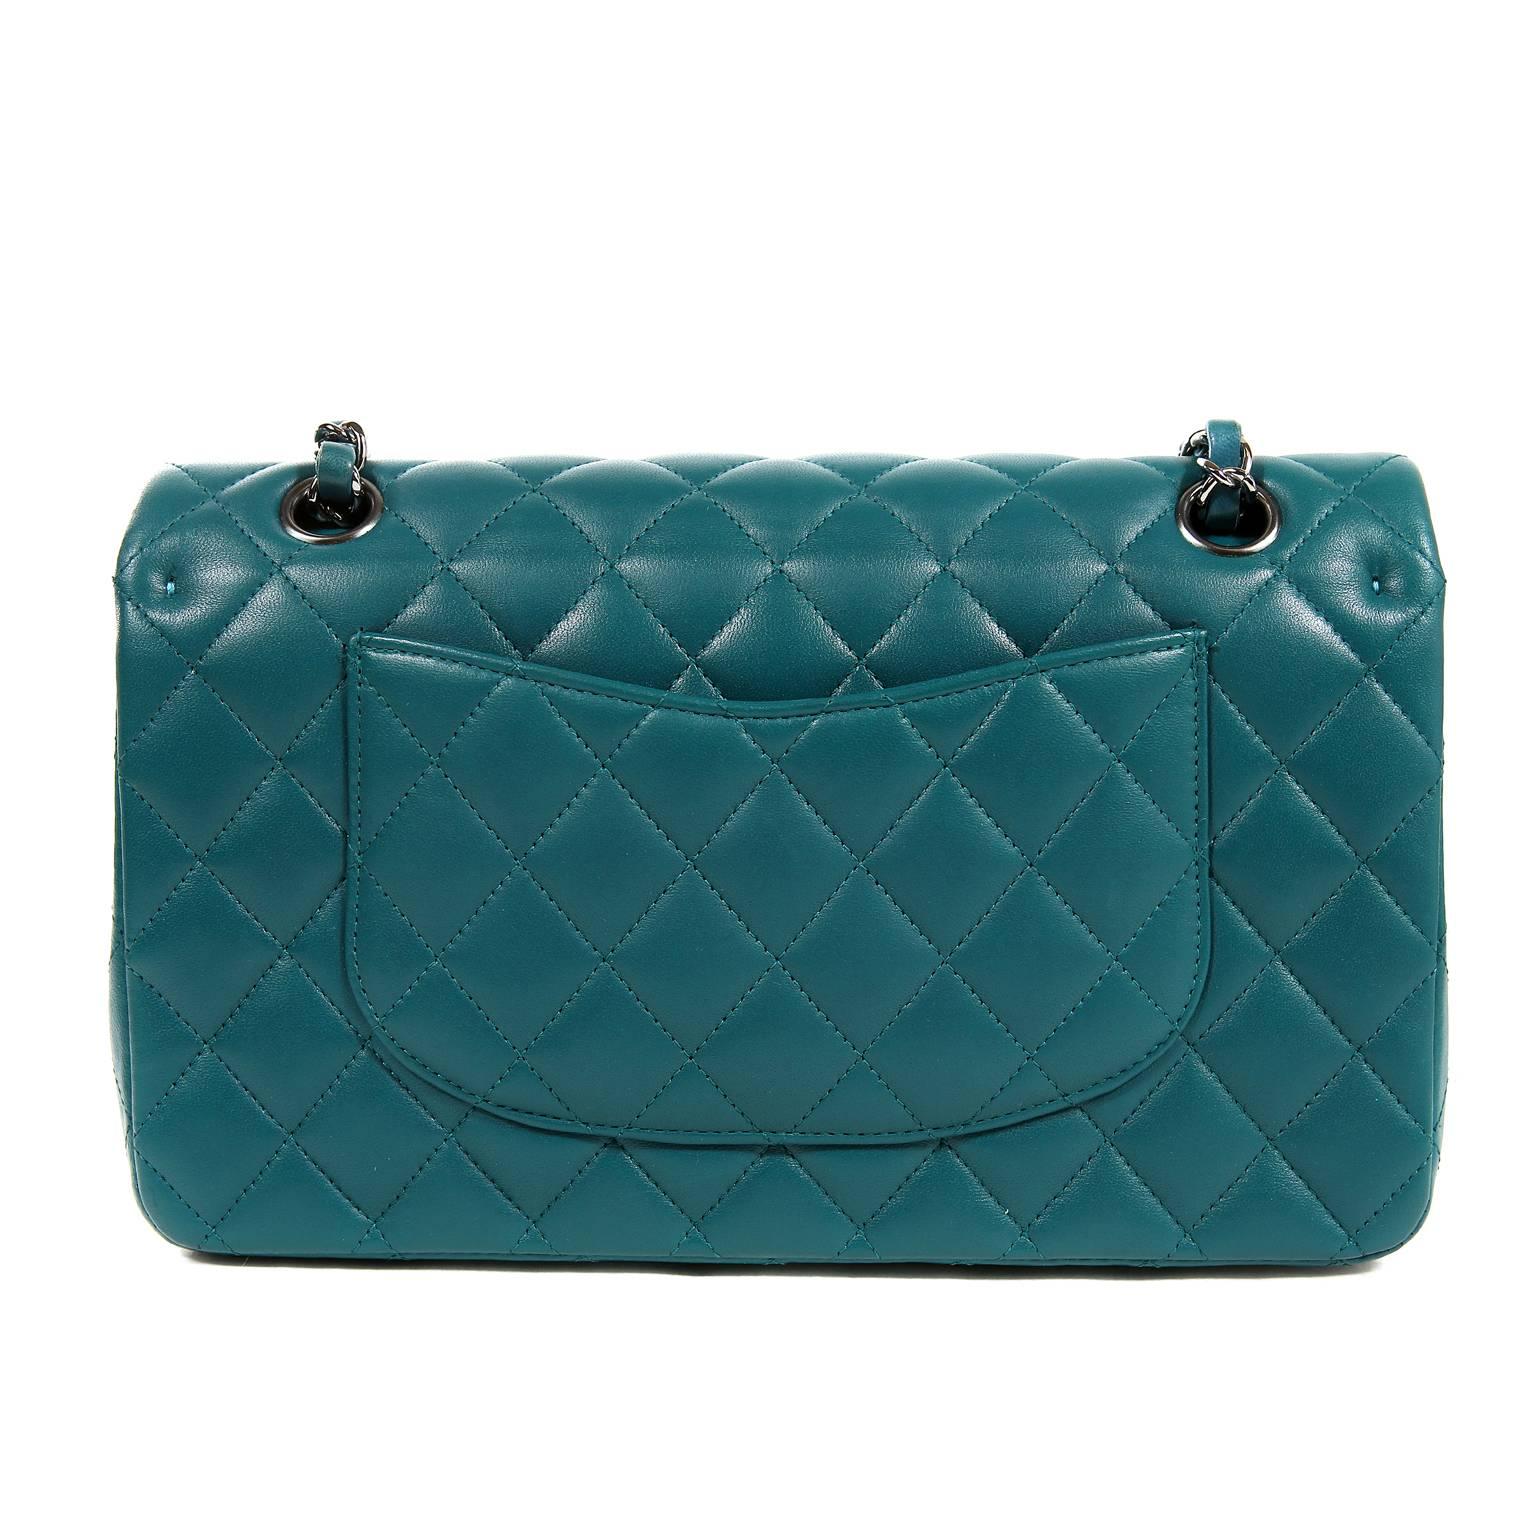 Chanel Teal Lambskin Medium Classic Flap Bag-  PRISTINE; it is unworn and never before carried. A beautiful bold color, teal with silver hardware is very striking. 
Jewel toned teal lambskin is quilted in signature Chanel diamond pattern.  Silver